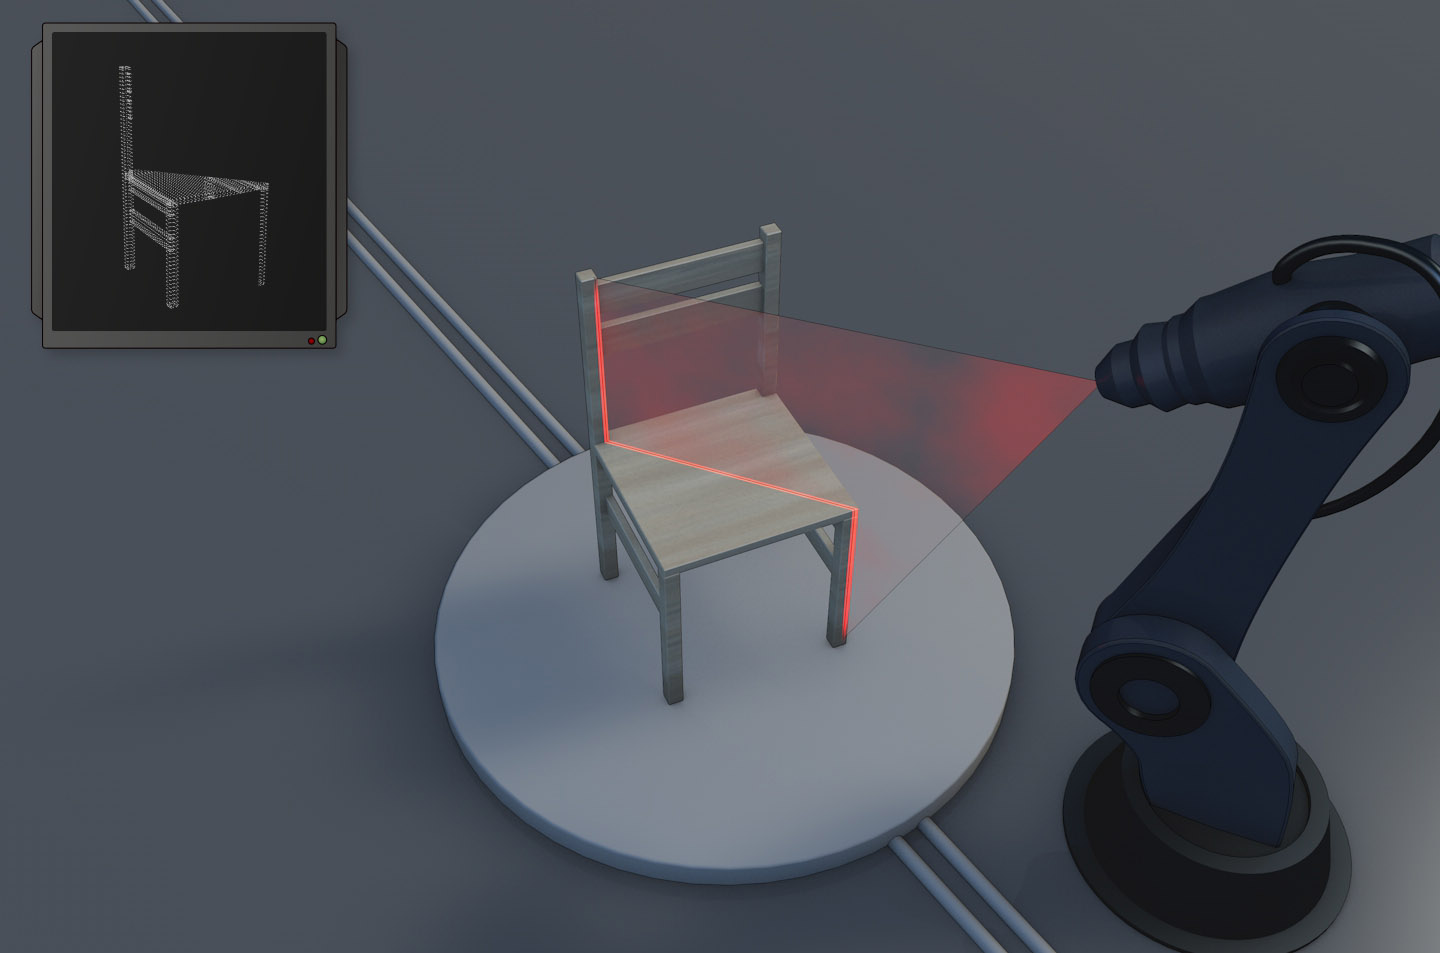 Schematic representation of the 3D scanning process, in this example for a chair.